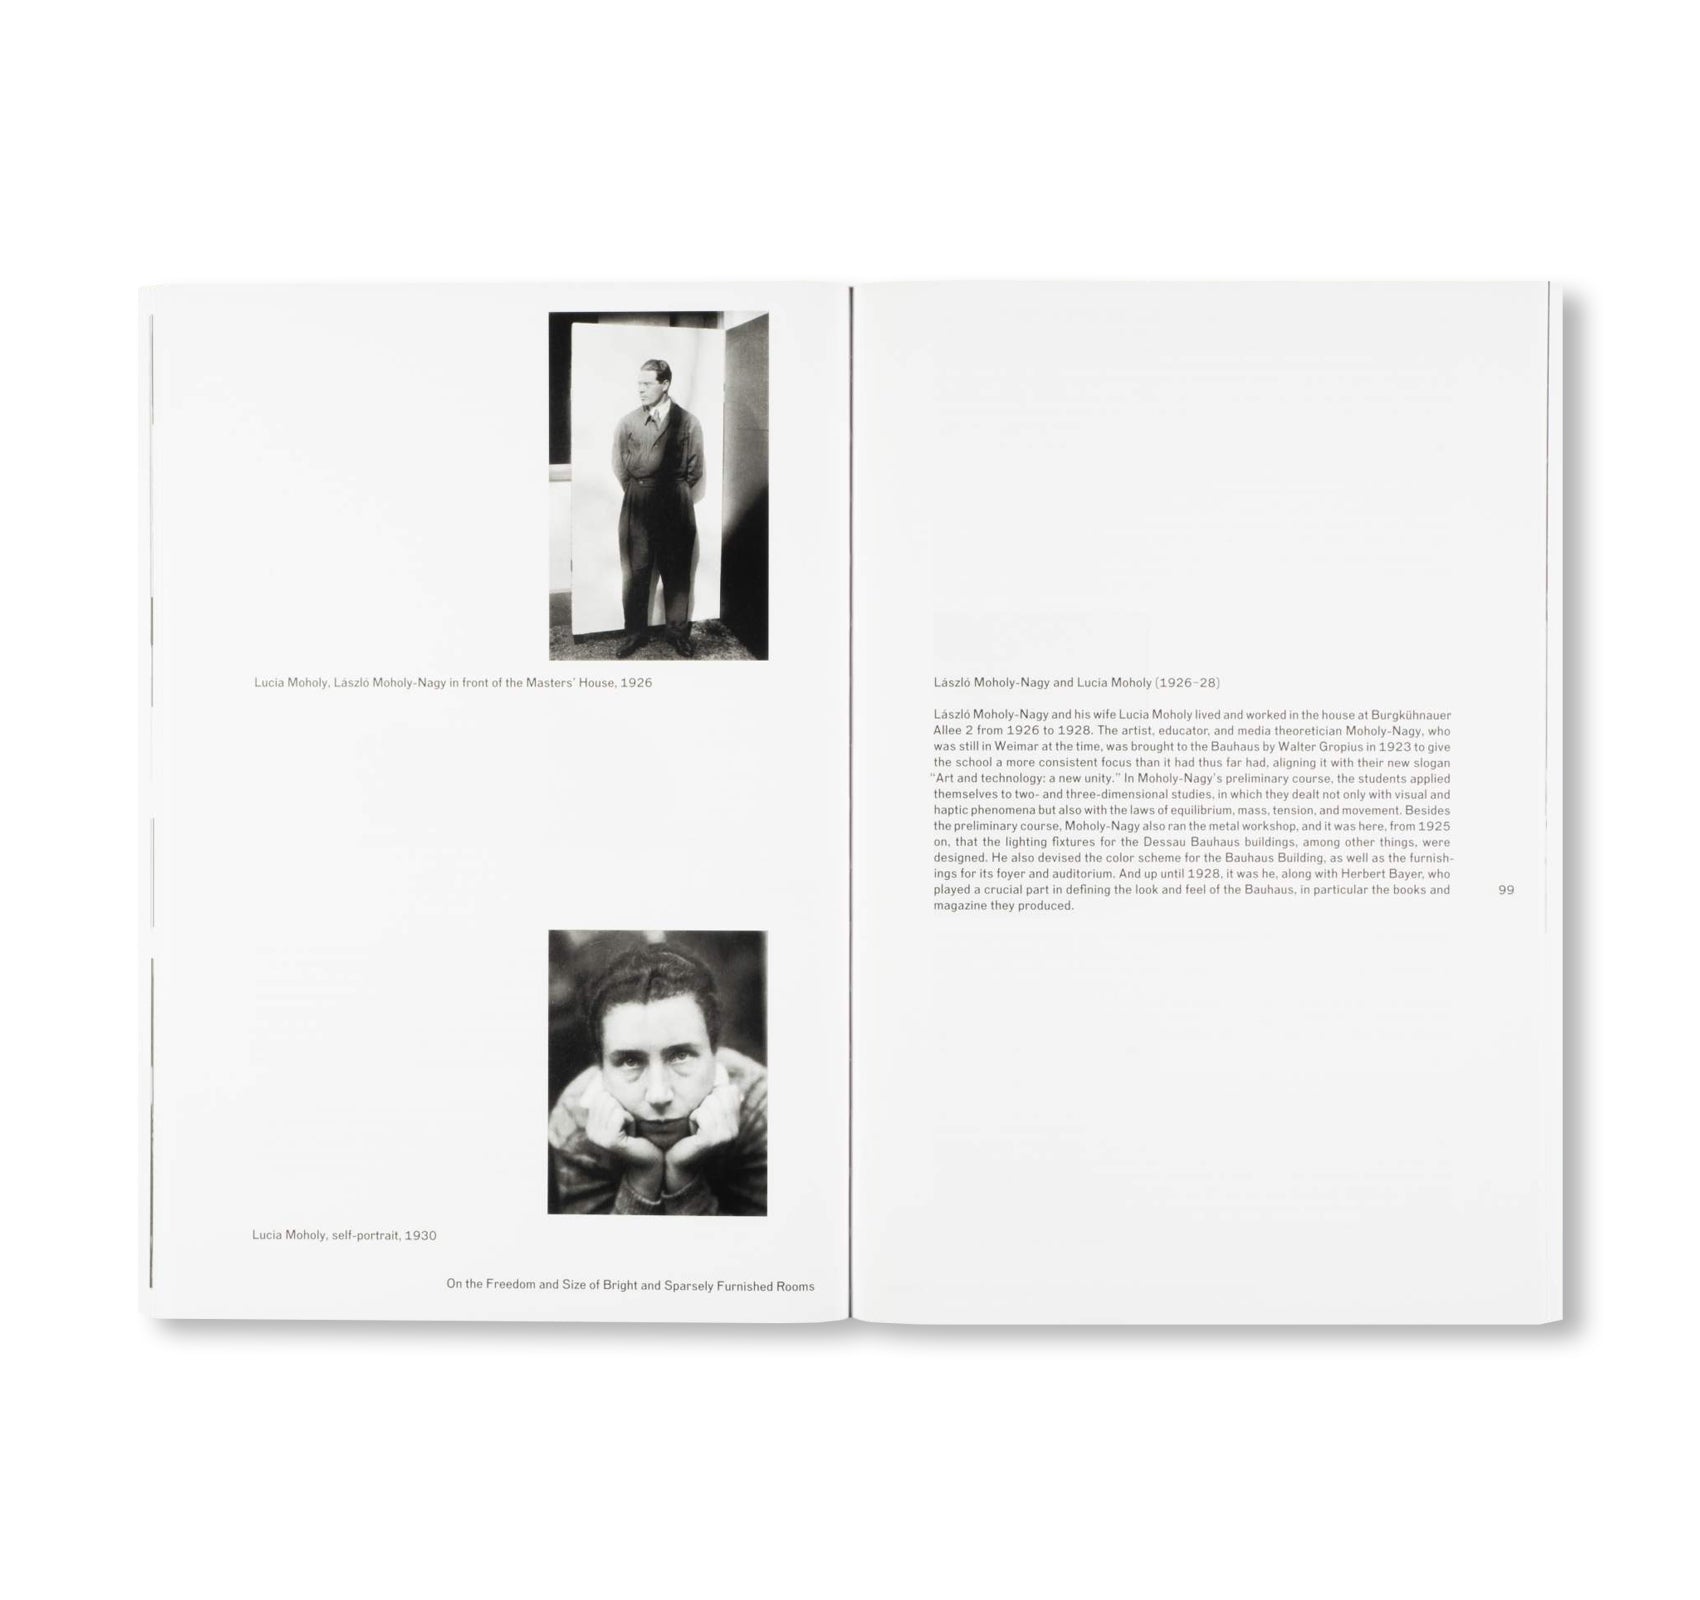 THE NEW MASTERS' HOUSES IN DESSAU / Edition Bauhaus 46 by Stiftung Bauhaus Dessau